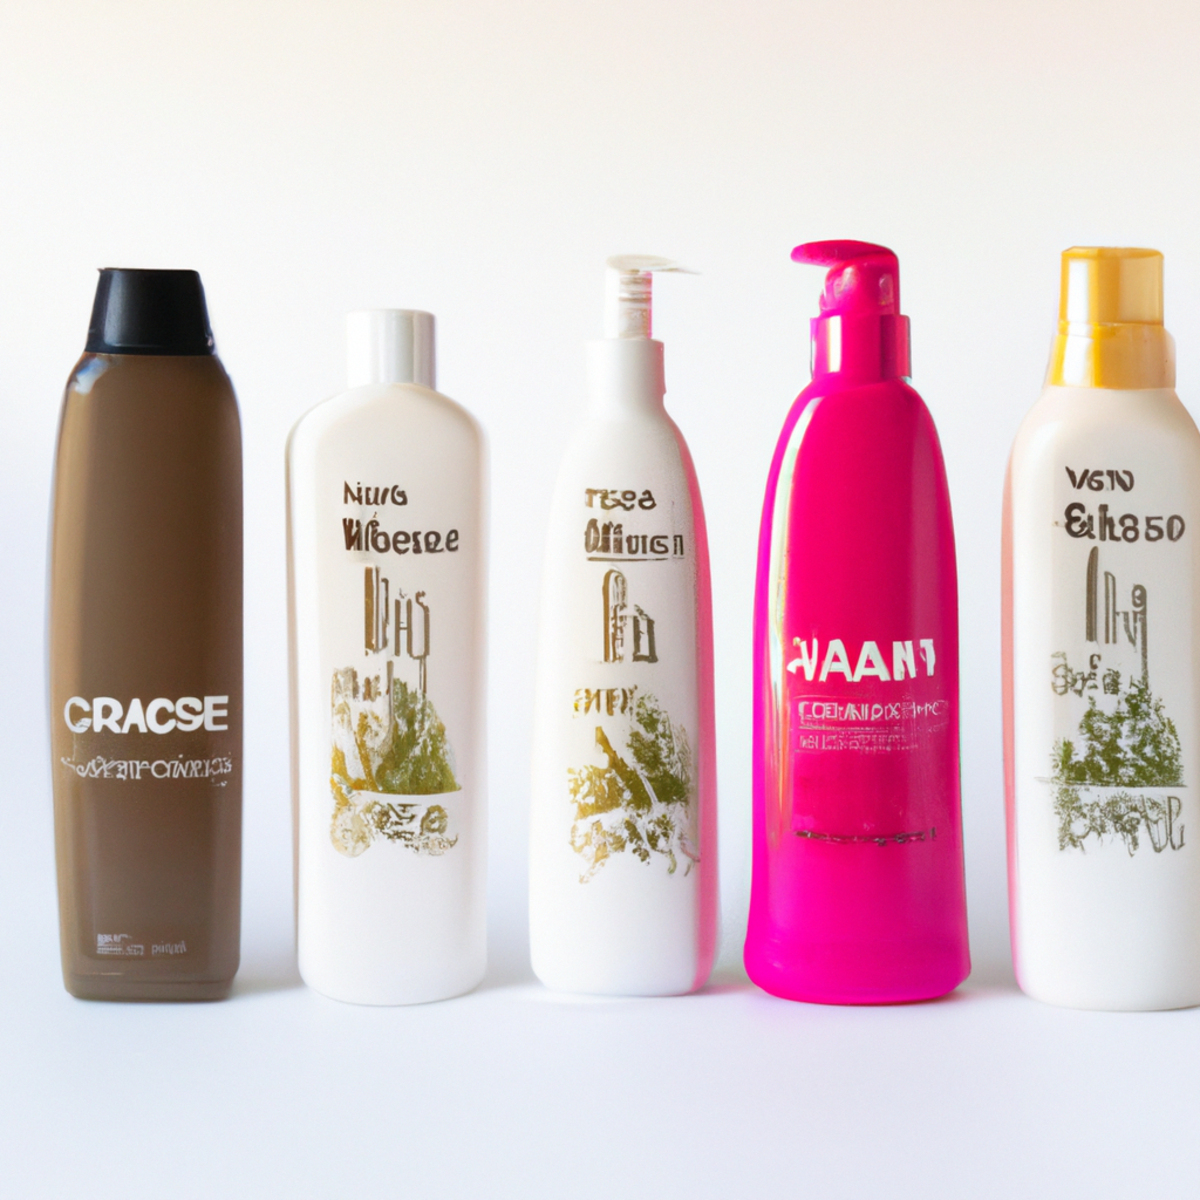 Collection of hair care products neatly arranged on white background. Includes volumizing shampoo, root lifting spray, hair thickening serum, and hair mask.